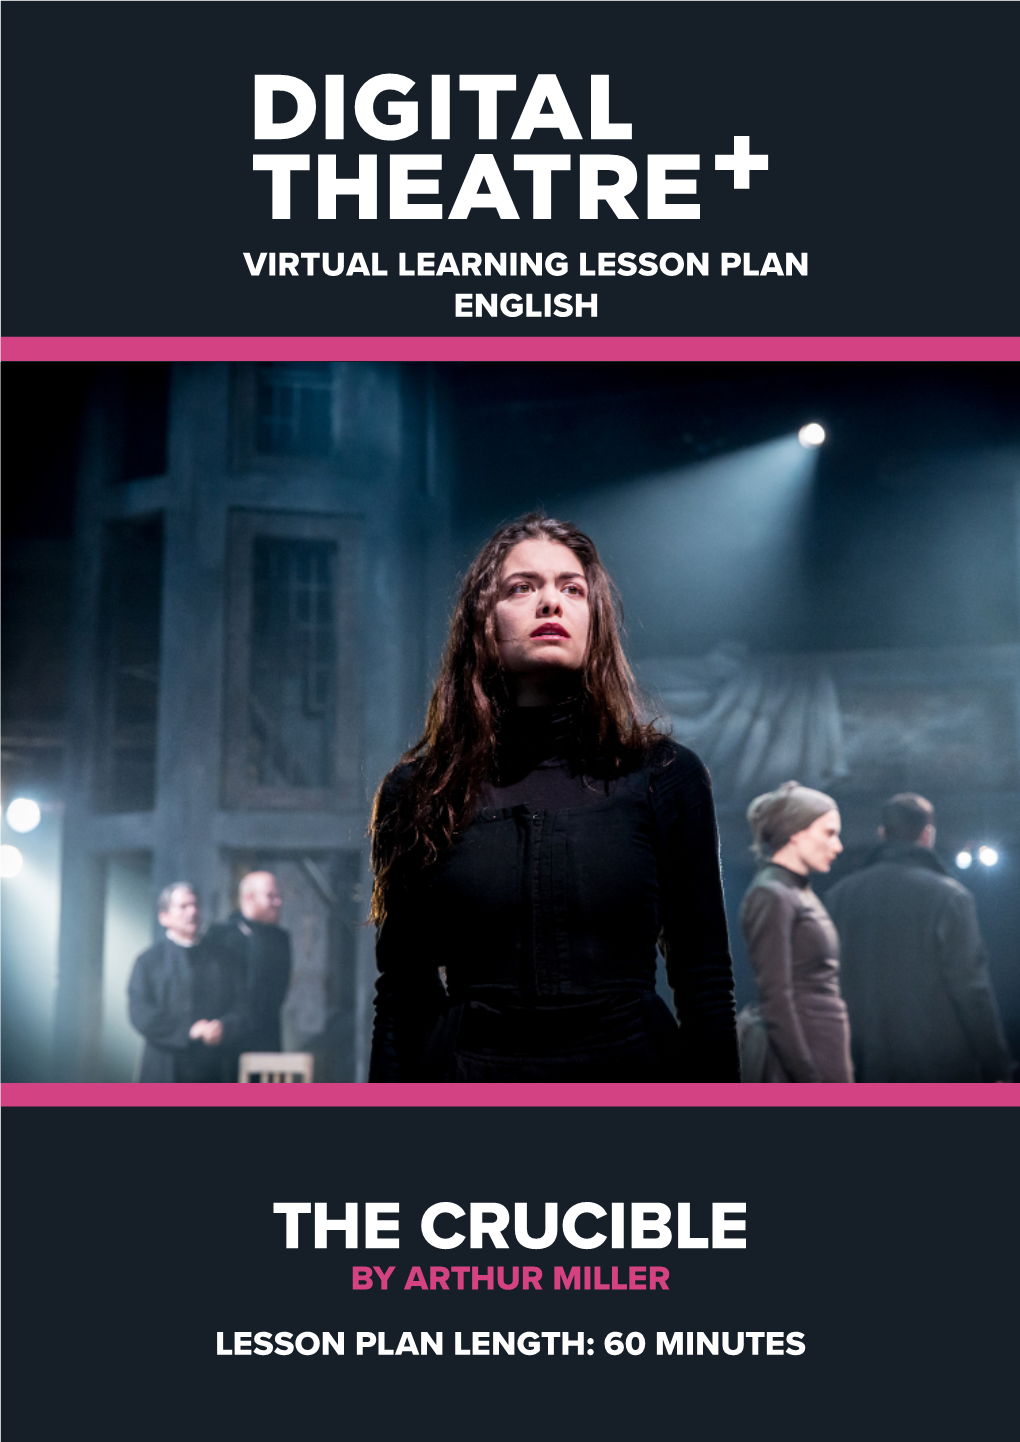 The Crucible by Arthur Miller Lesson Plan Length: 60 Minutes Lesson Plan the Crucible